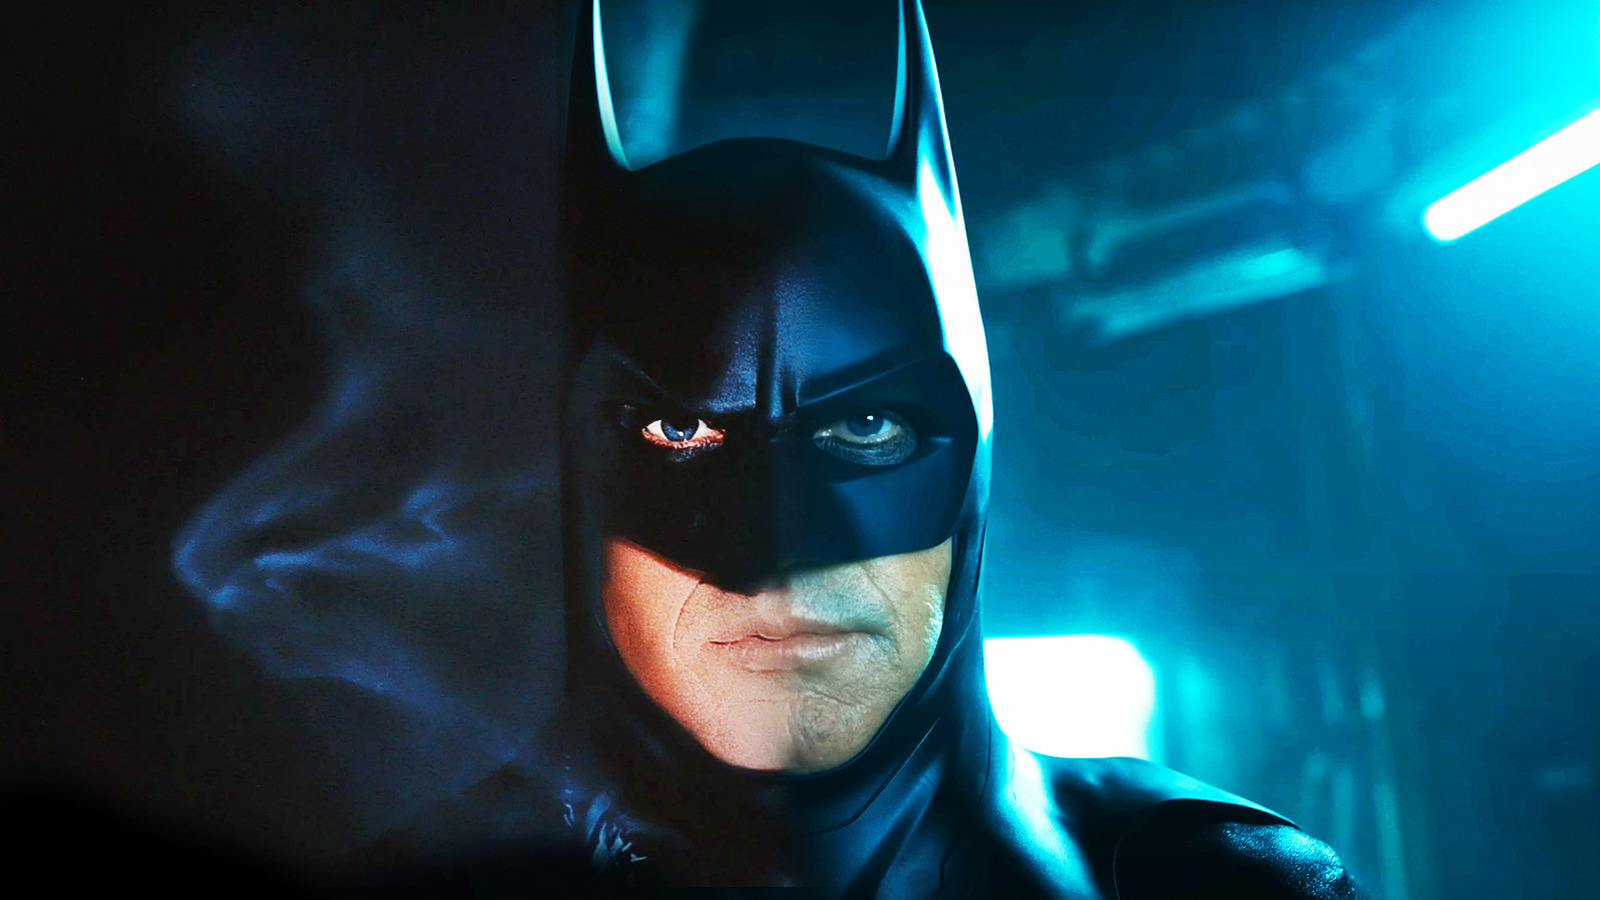 How The Batsuits In The Flash Super Bowl Spot Reveal The History Of Michael  Keaton's Batman